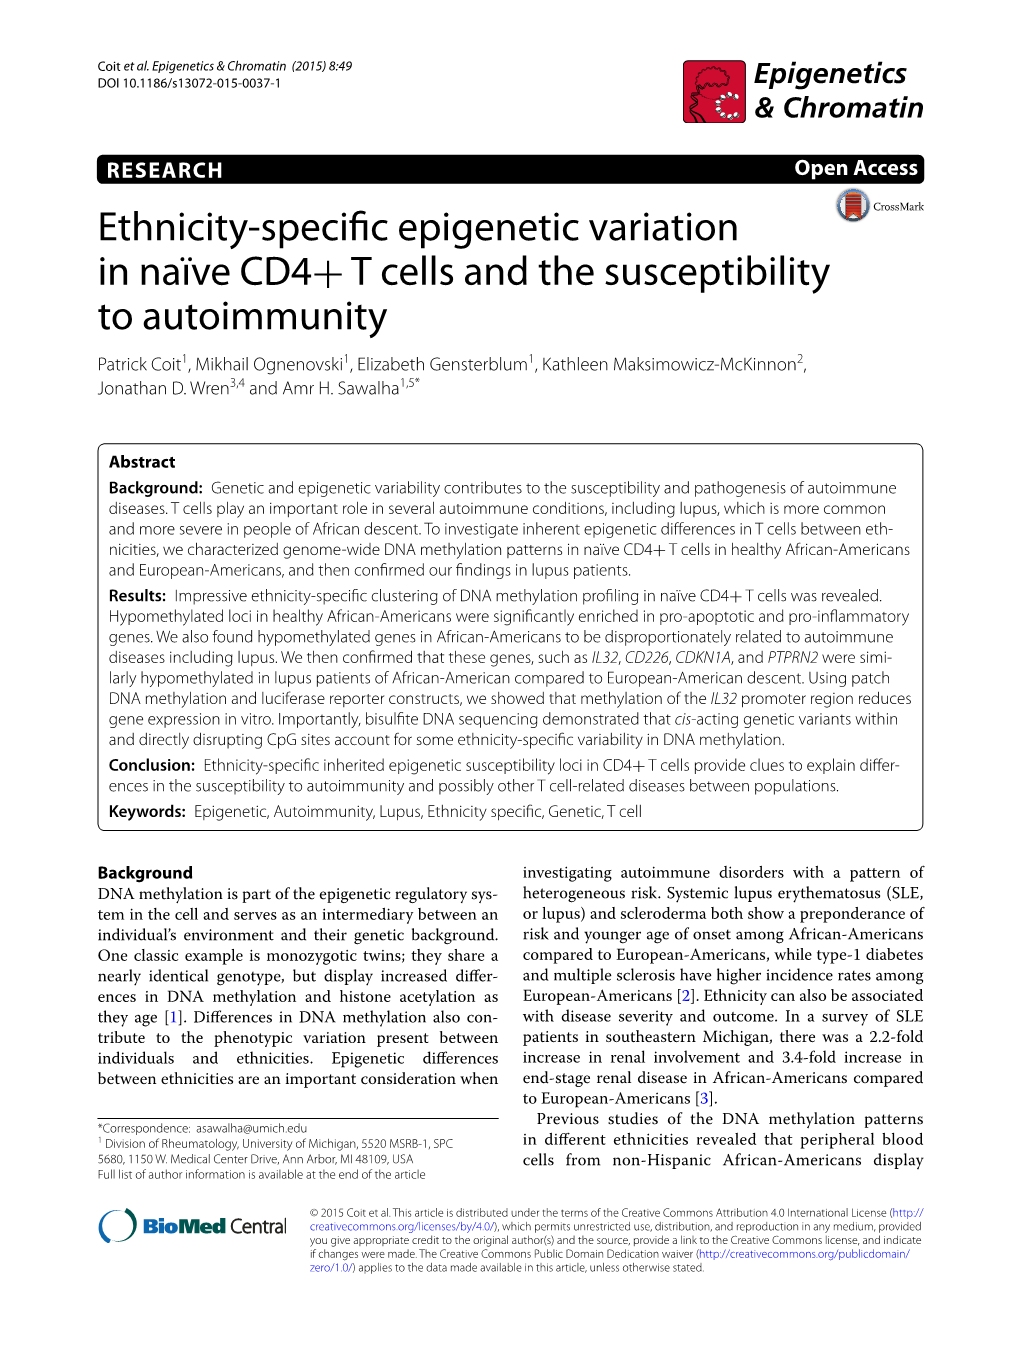 Ethnicity-Specific Epigenetic Variation in Naïve CD4+ T Cells and the Susceptibility to Autoimmunity